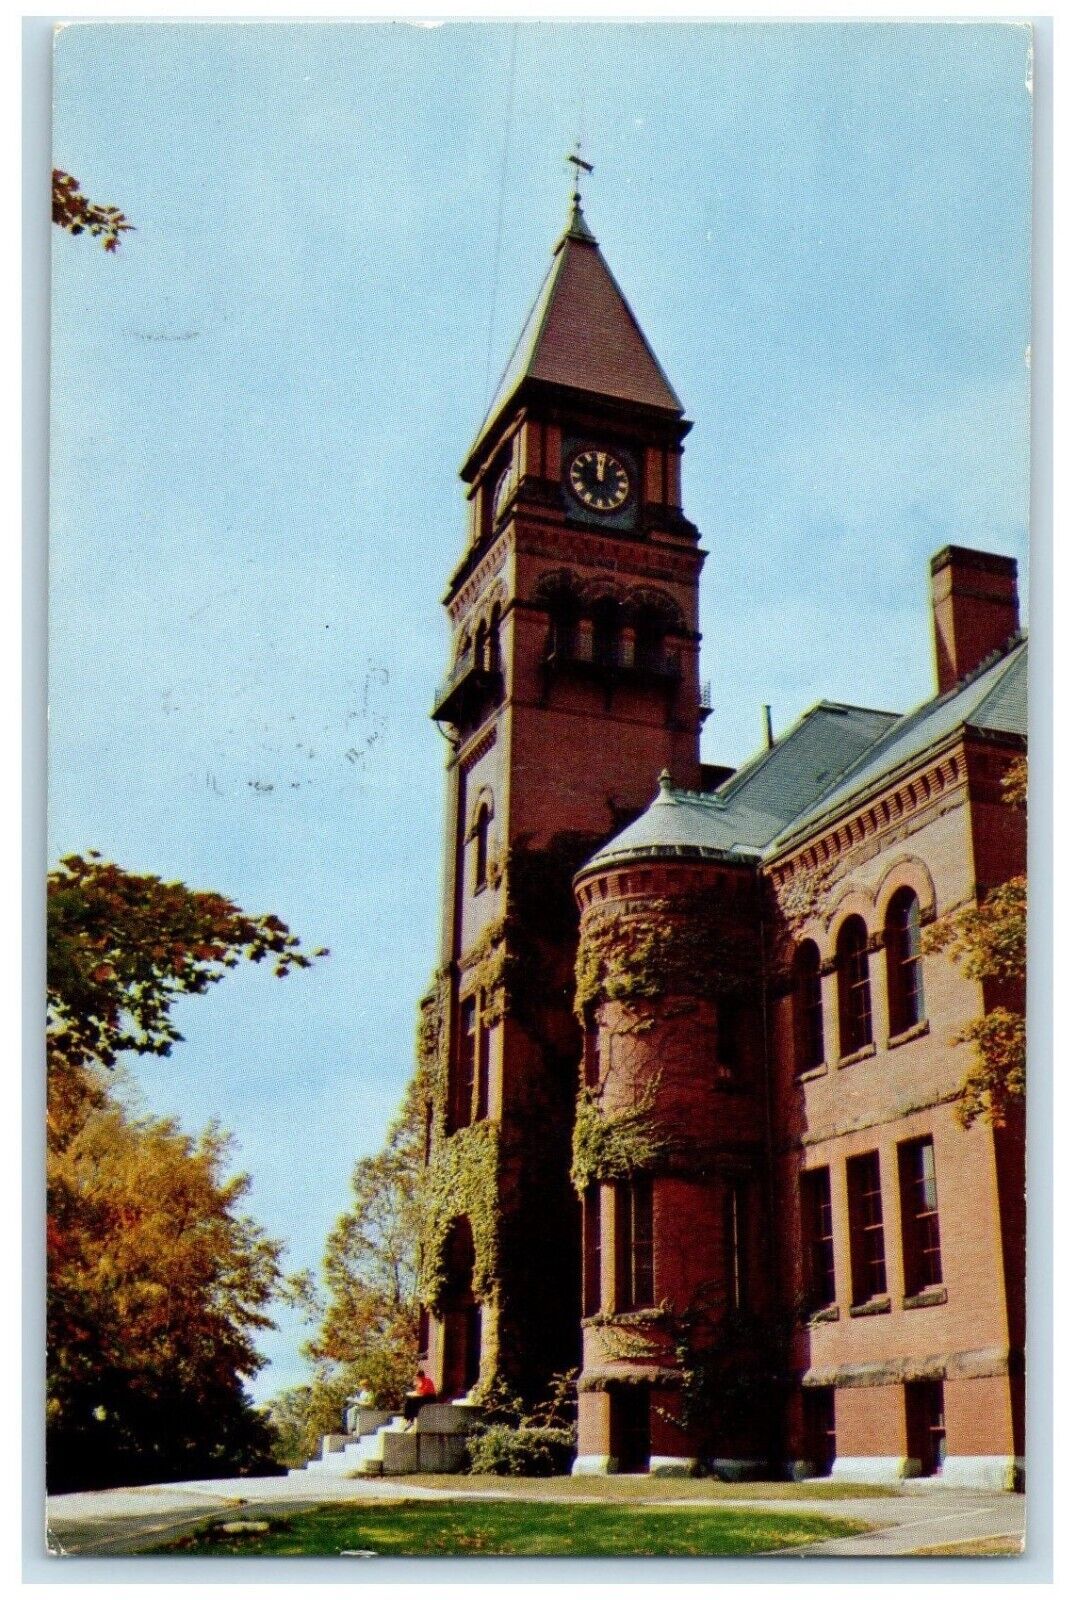 1962 Pinkerton Academy Exterior Derry New Hampshire NH Spacetown U.S.A. Postcard